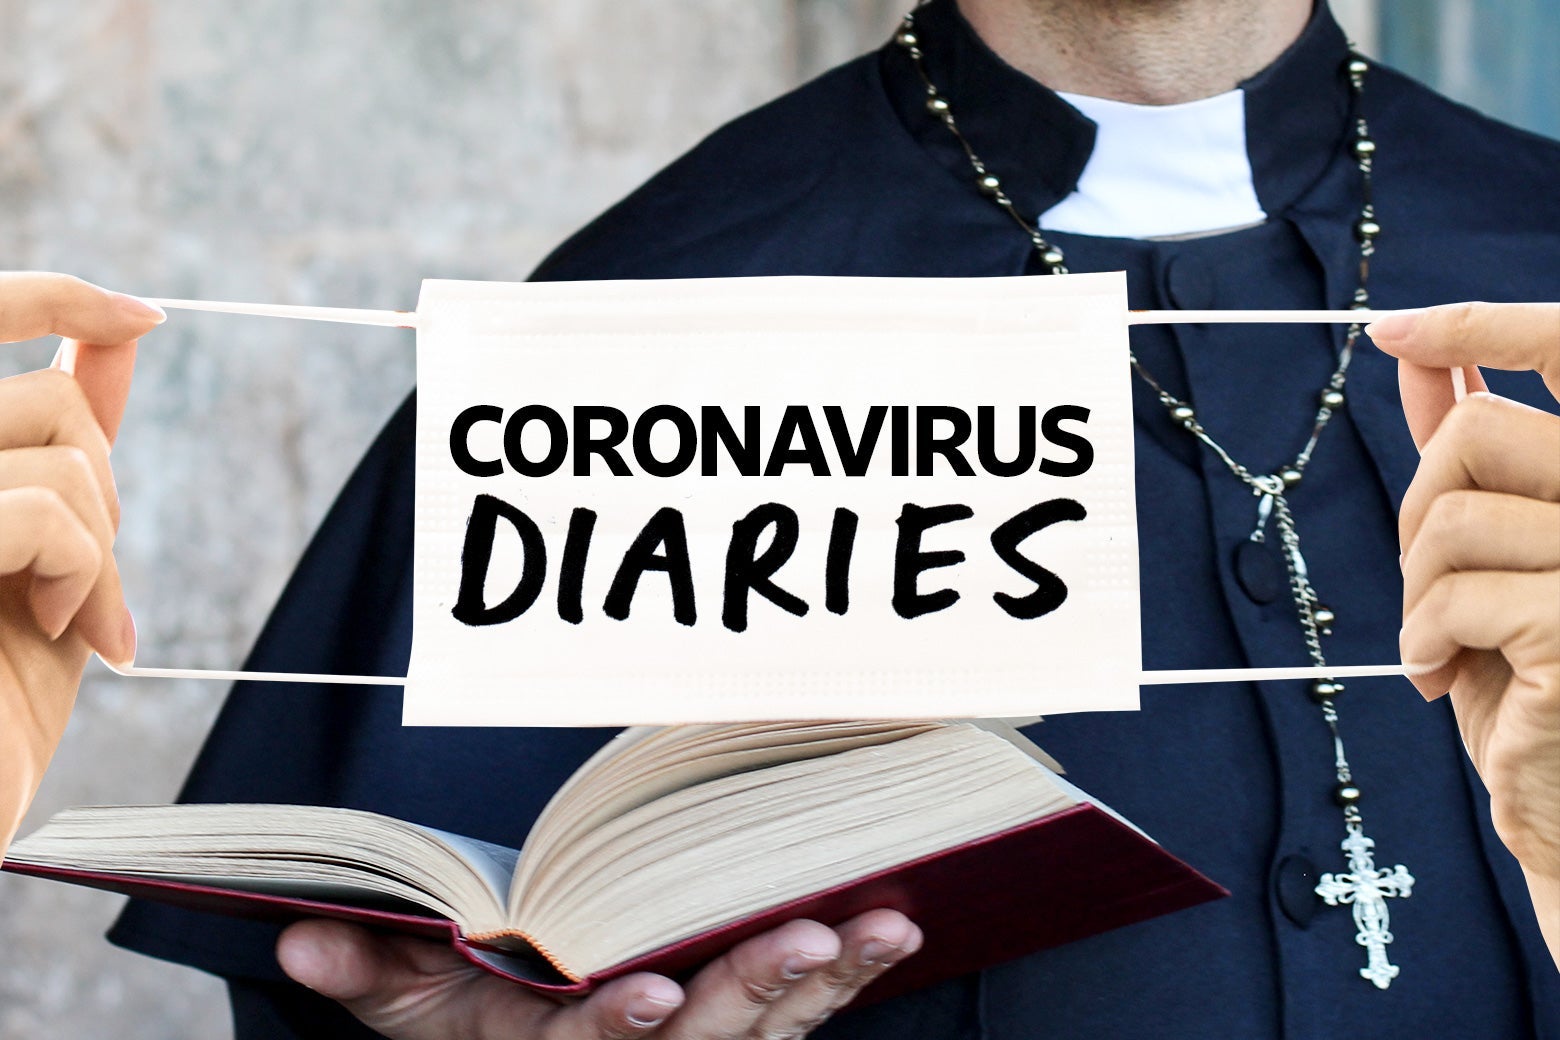 Two hands holding a mask that says "Coronavirus Diaries" over a photo of a priest holding an open book